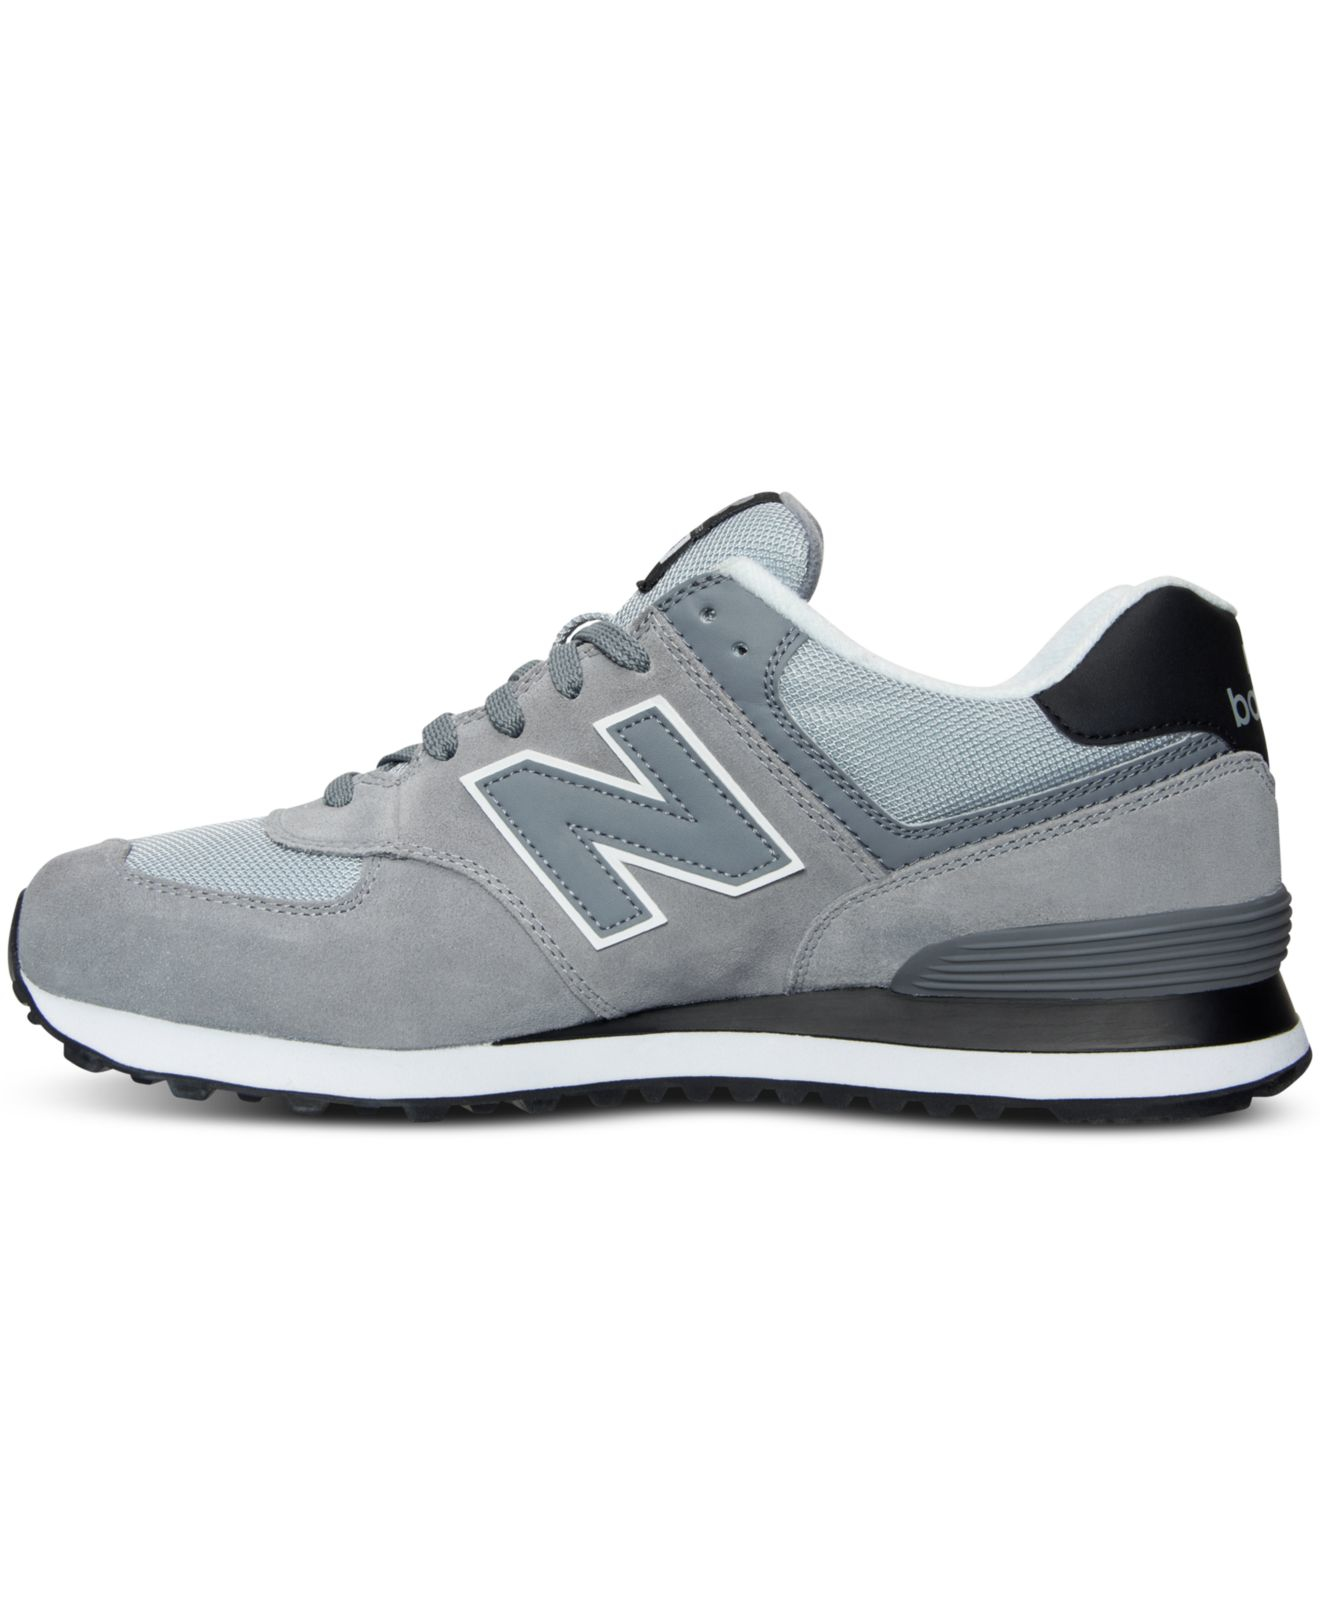 Lyst - New Balance Men's 574 Core Plus Casual Sneakers From Finish Line ...